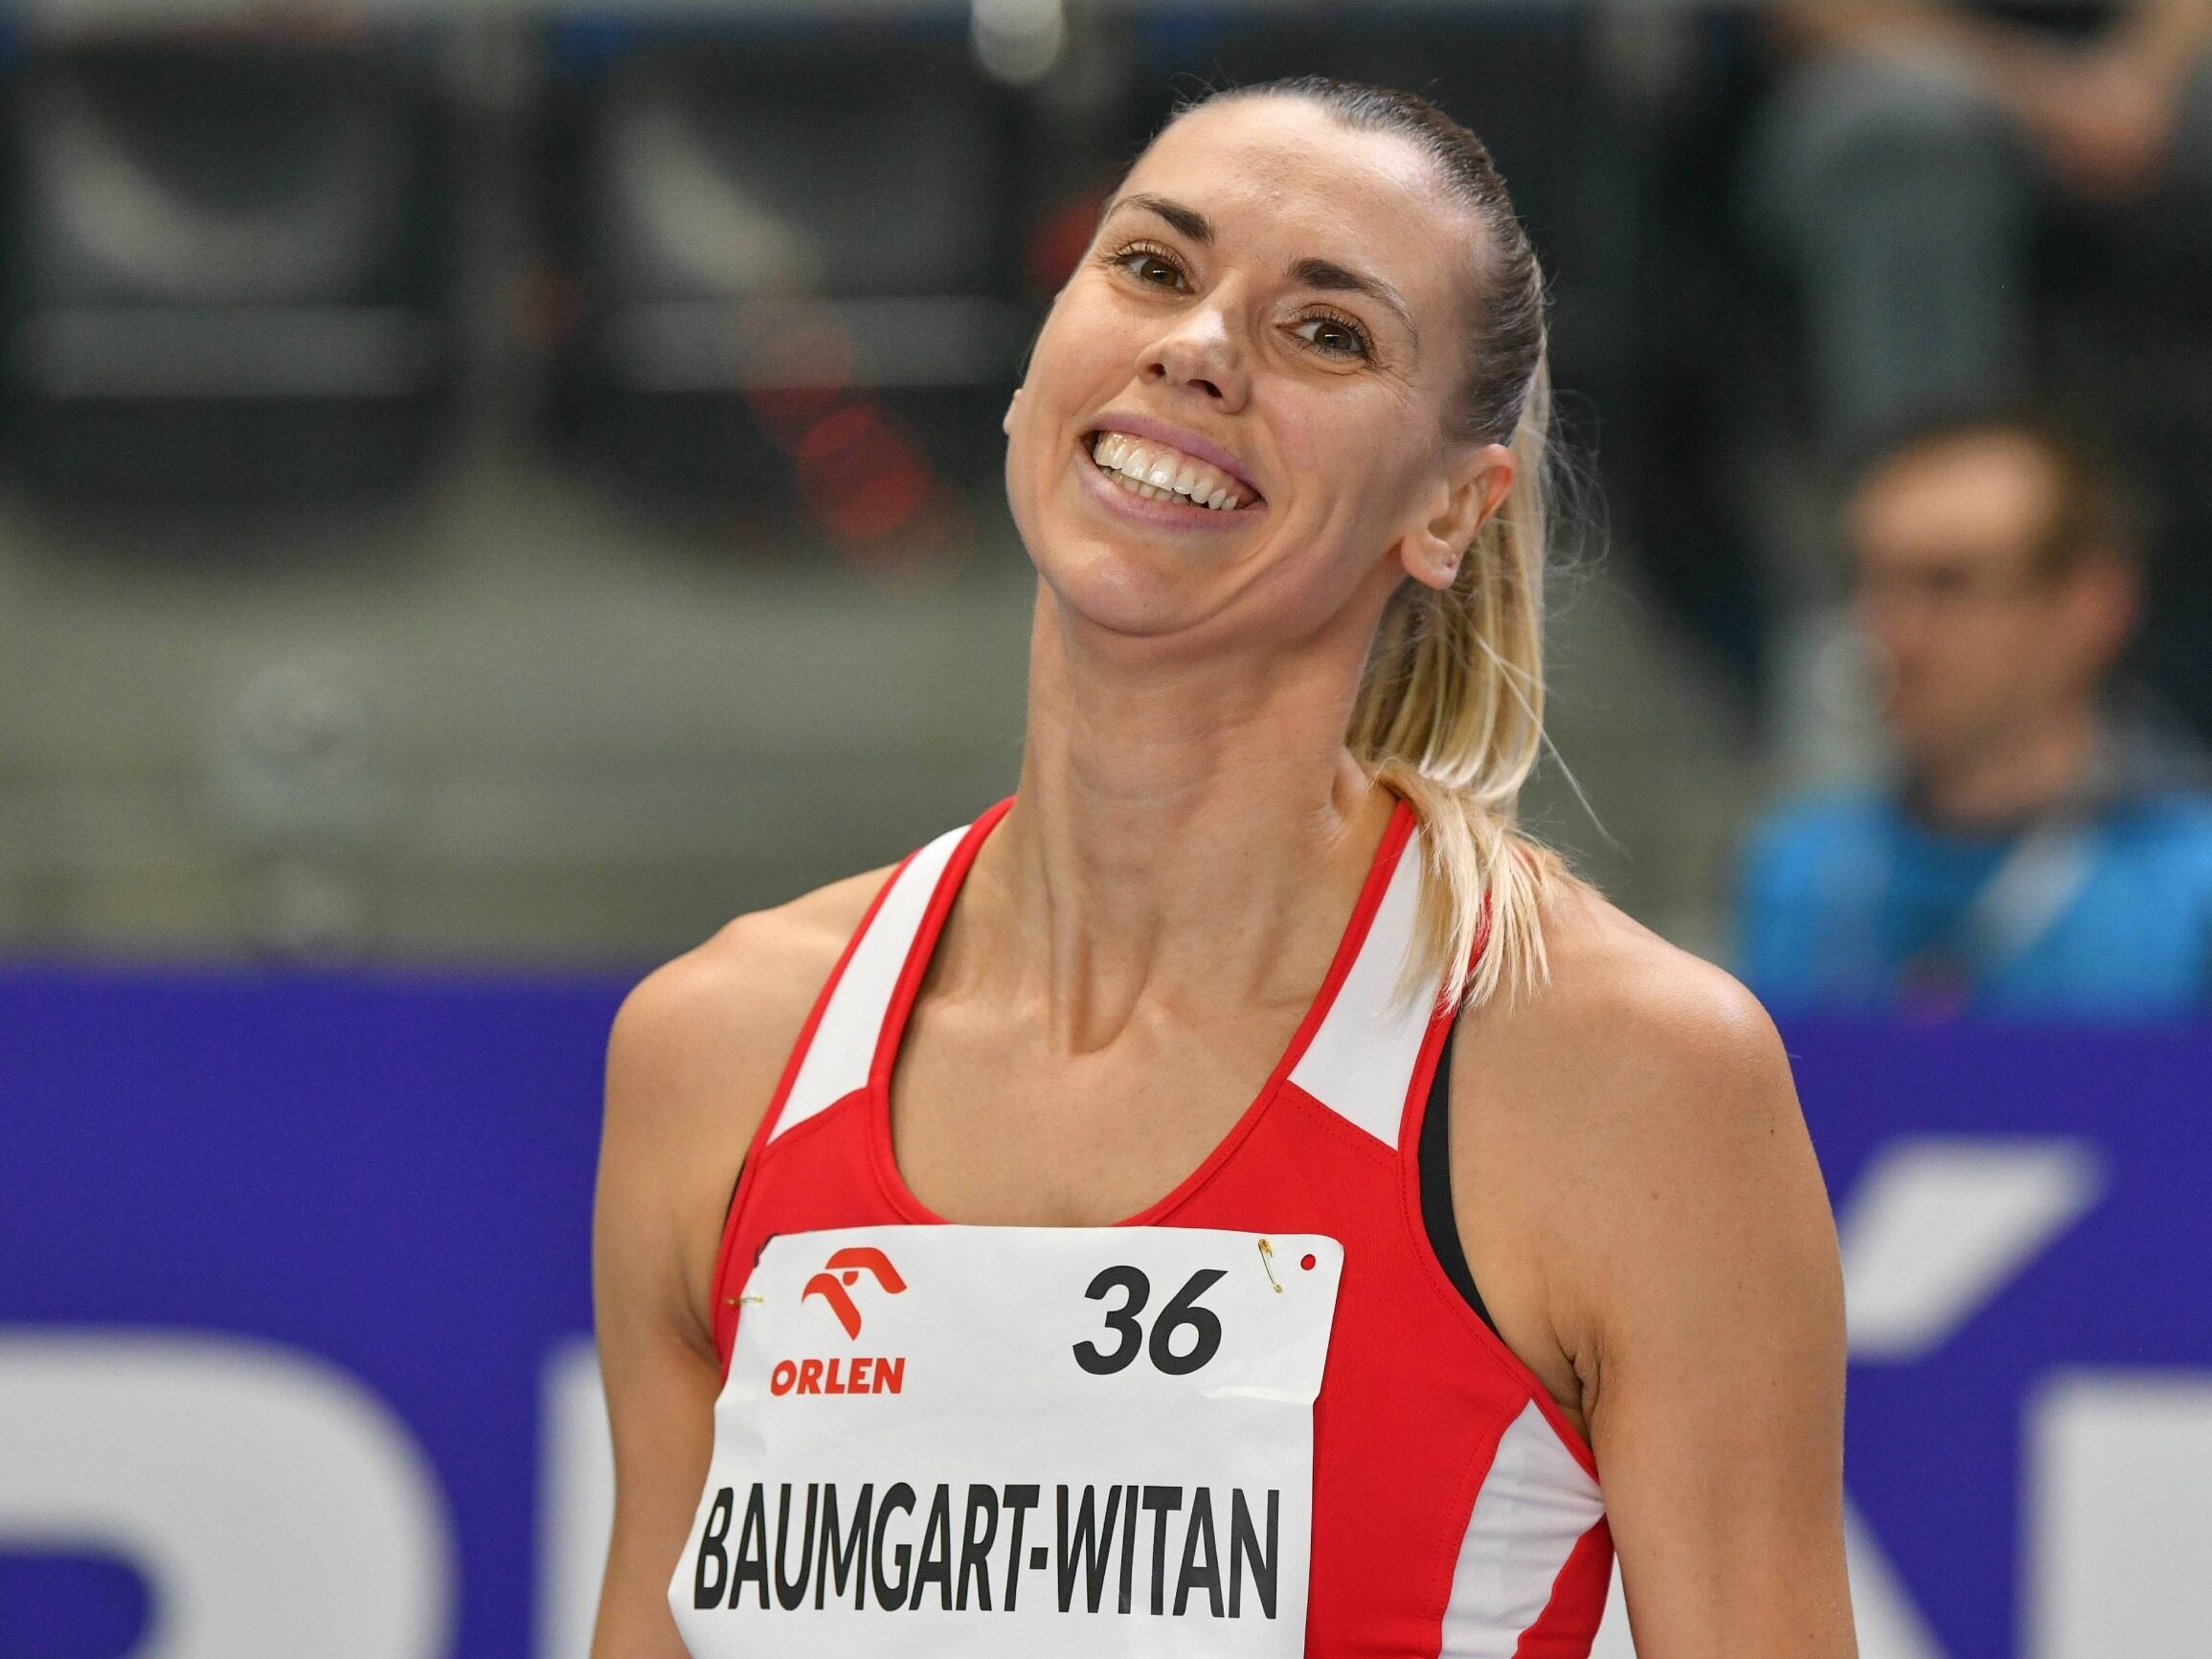 Iga Baumgart-Witan: “You have to measure your intentions.  The injury didn't bother me"